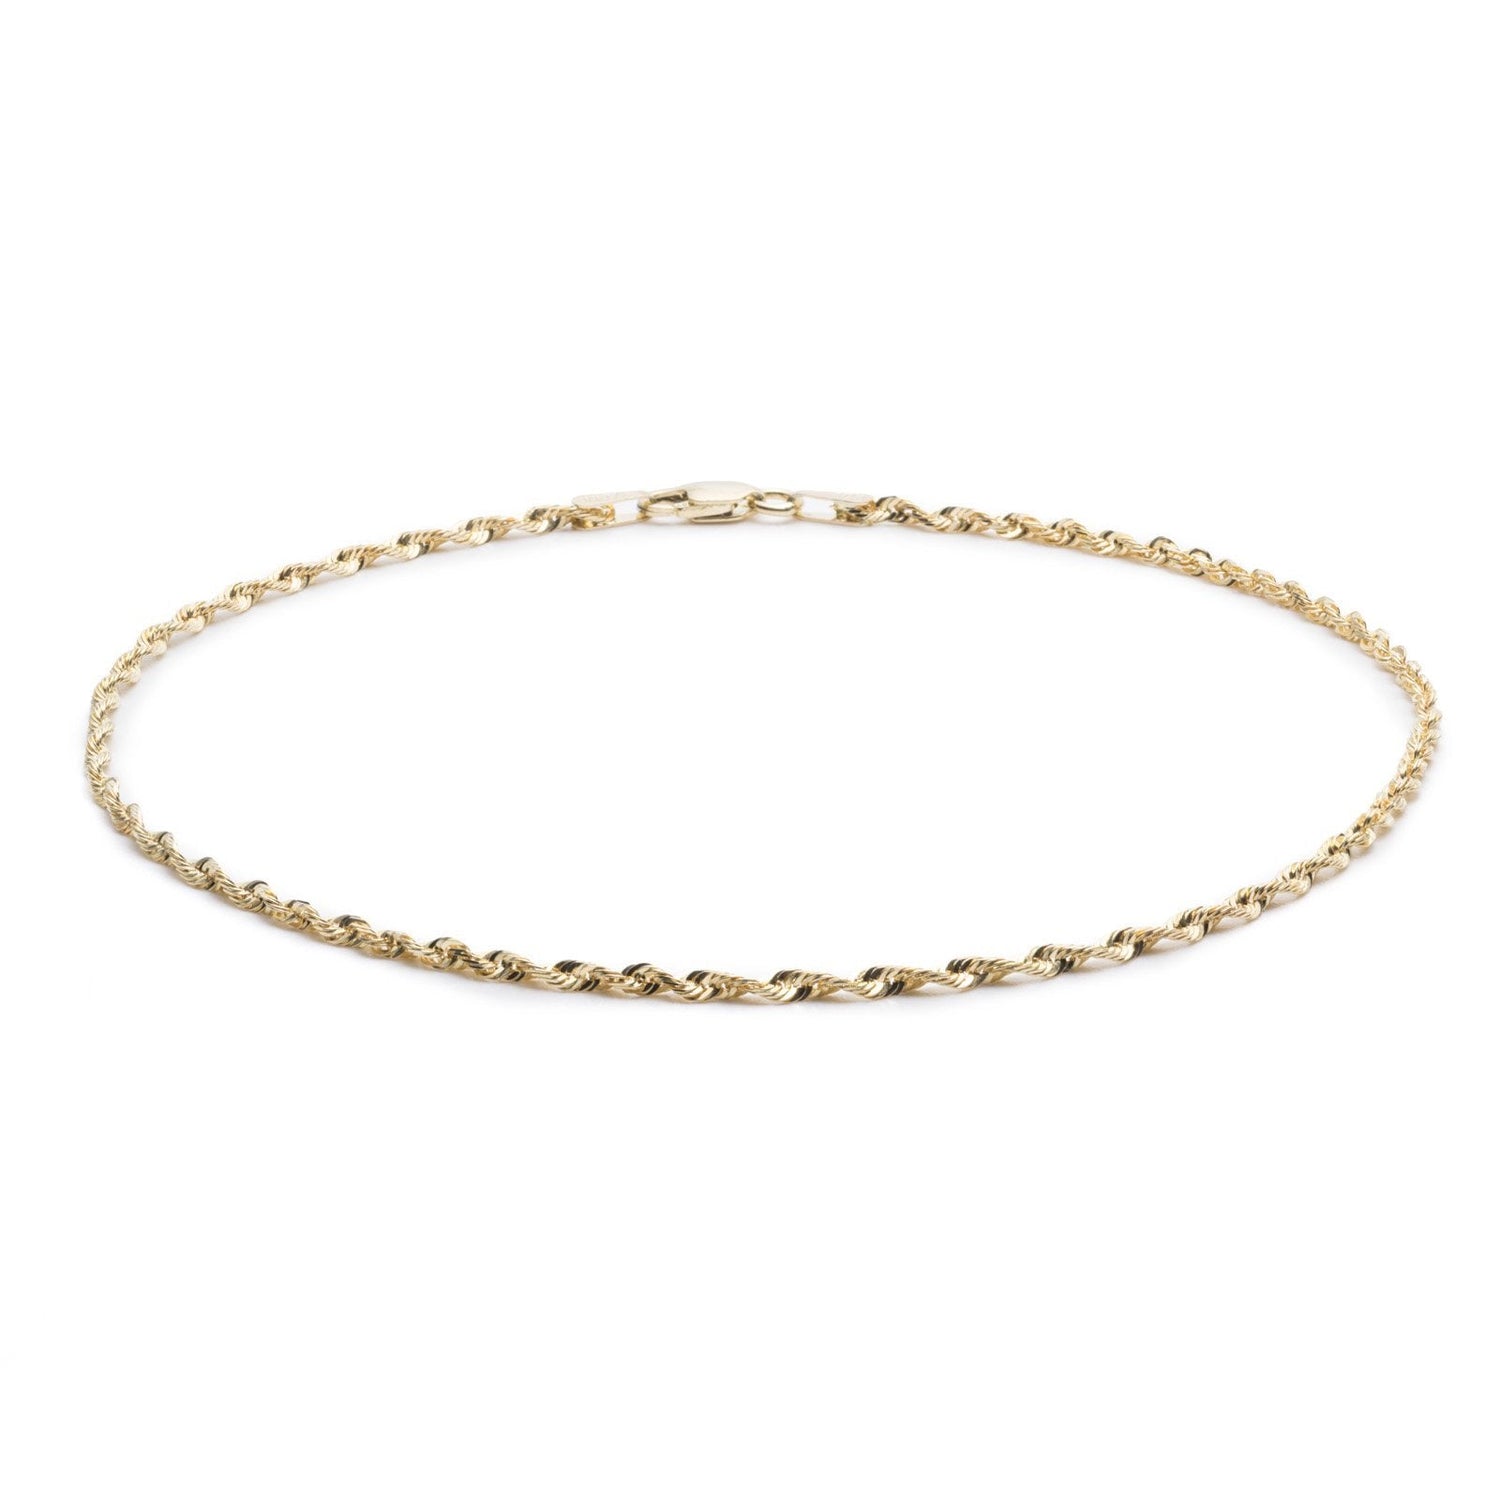 10k Yellow Gold Solid Diamond Cut Rope Chain Bracelet and Anklet, 2.5mm